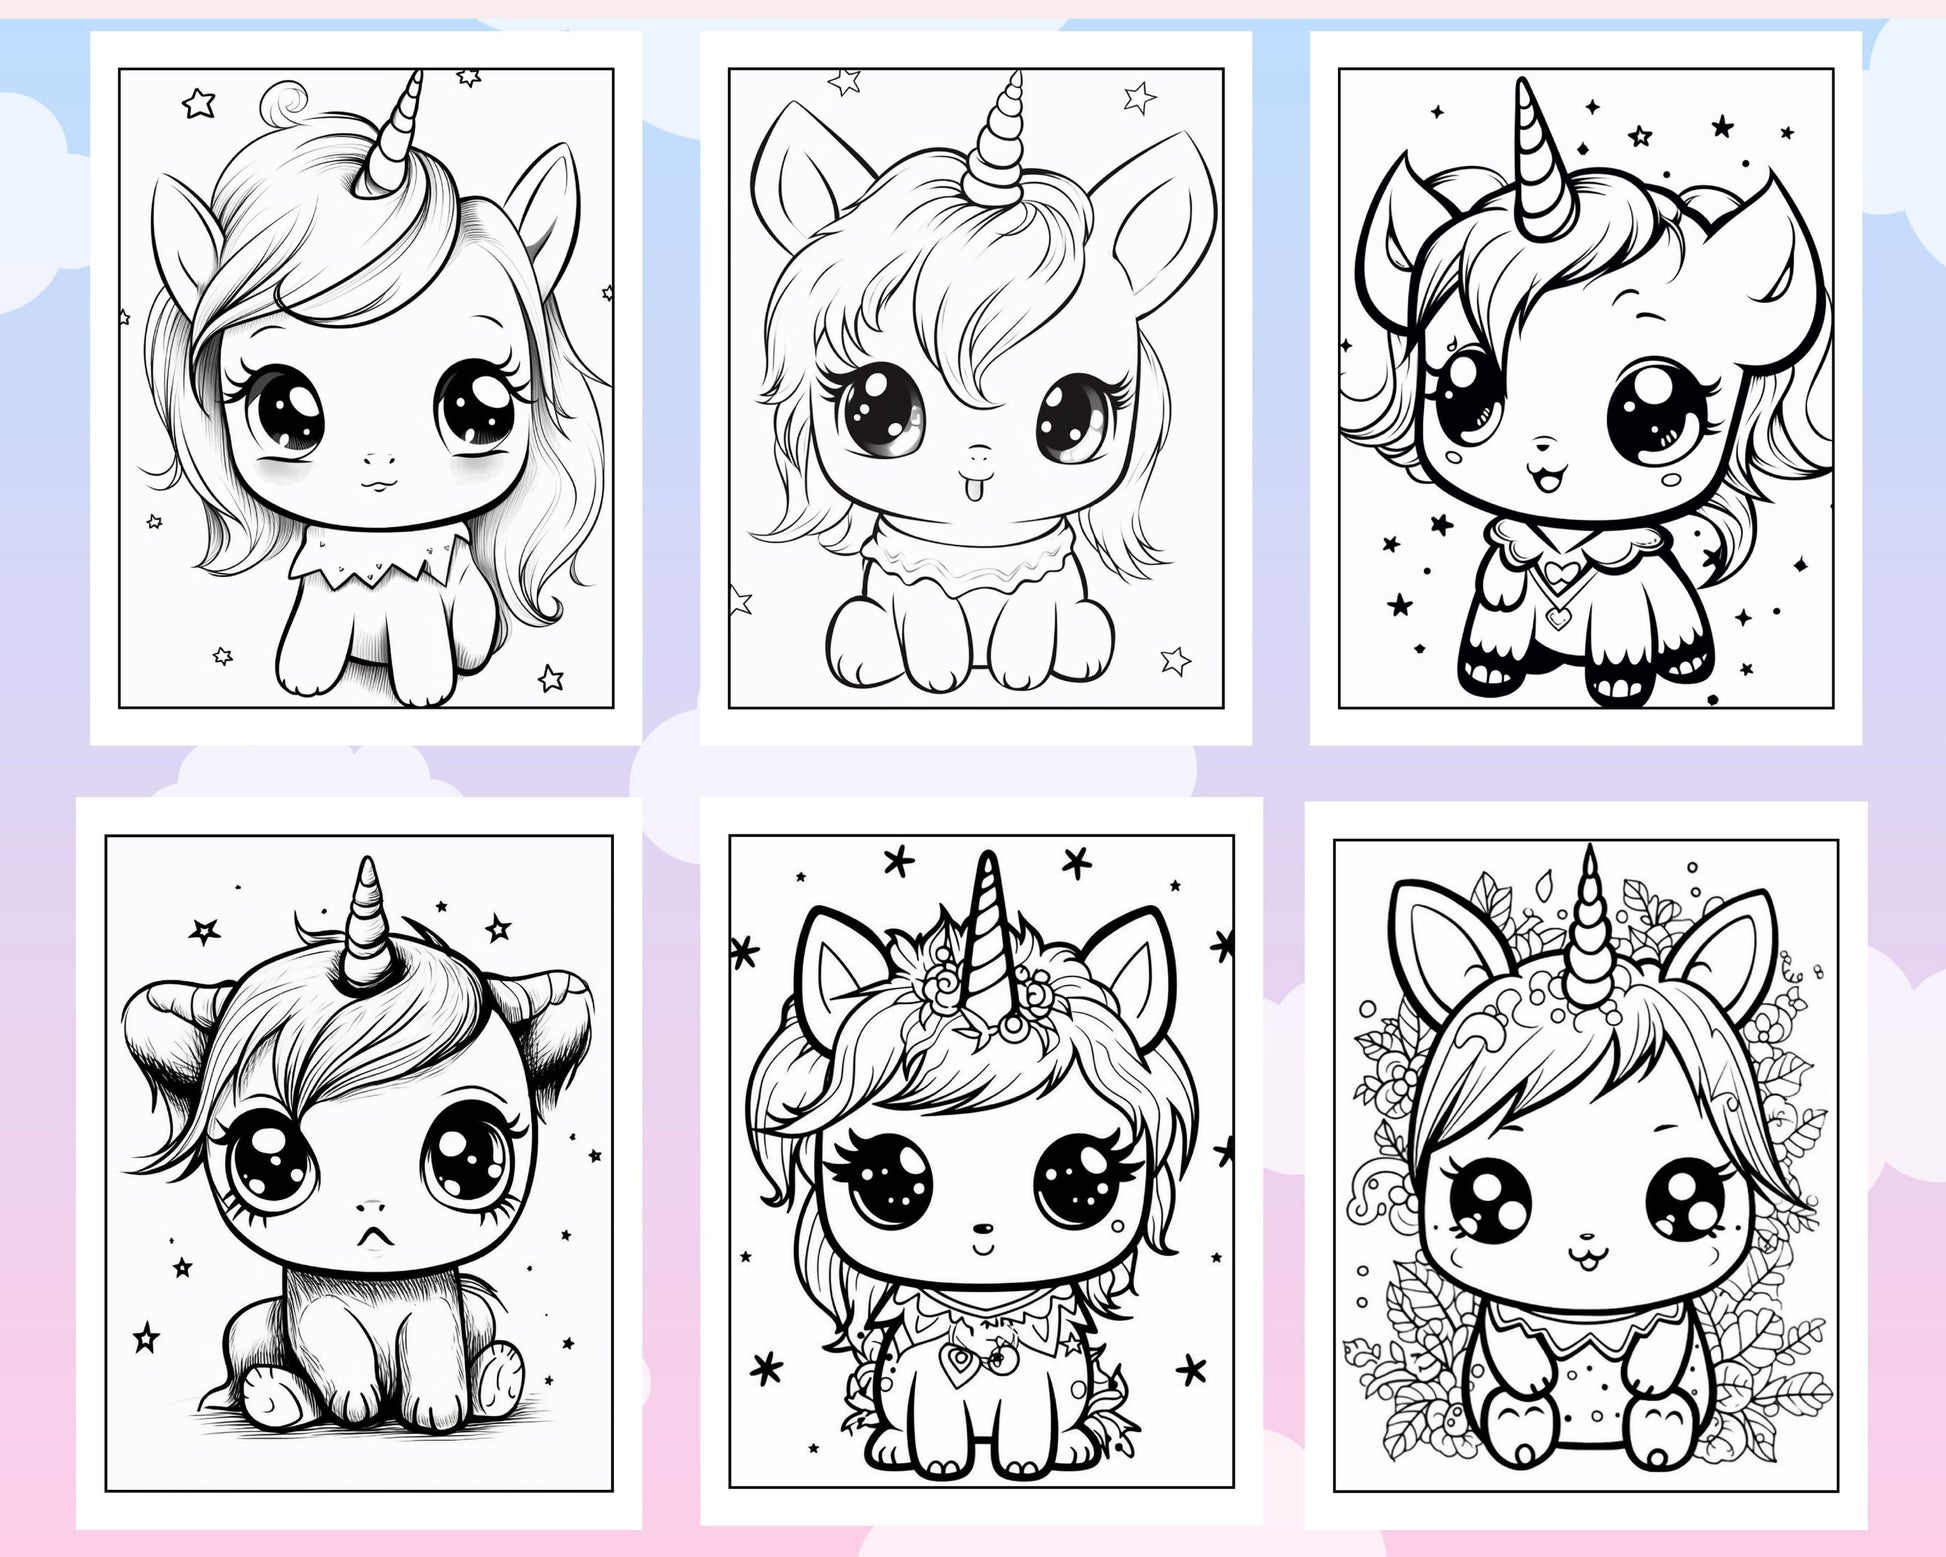 150 Adorable Kawaii Unicorn Printable Coloring Pages for Kids, Printable PDF File Instant Download - raspiee